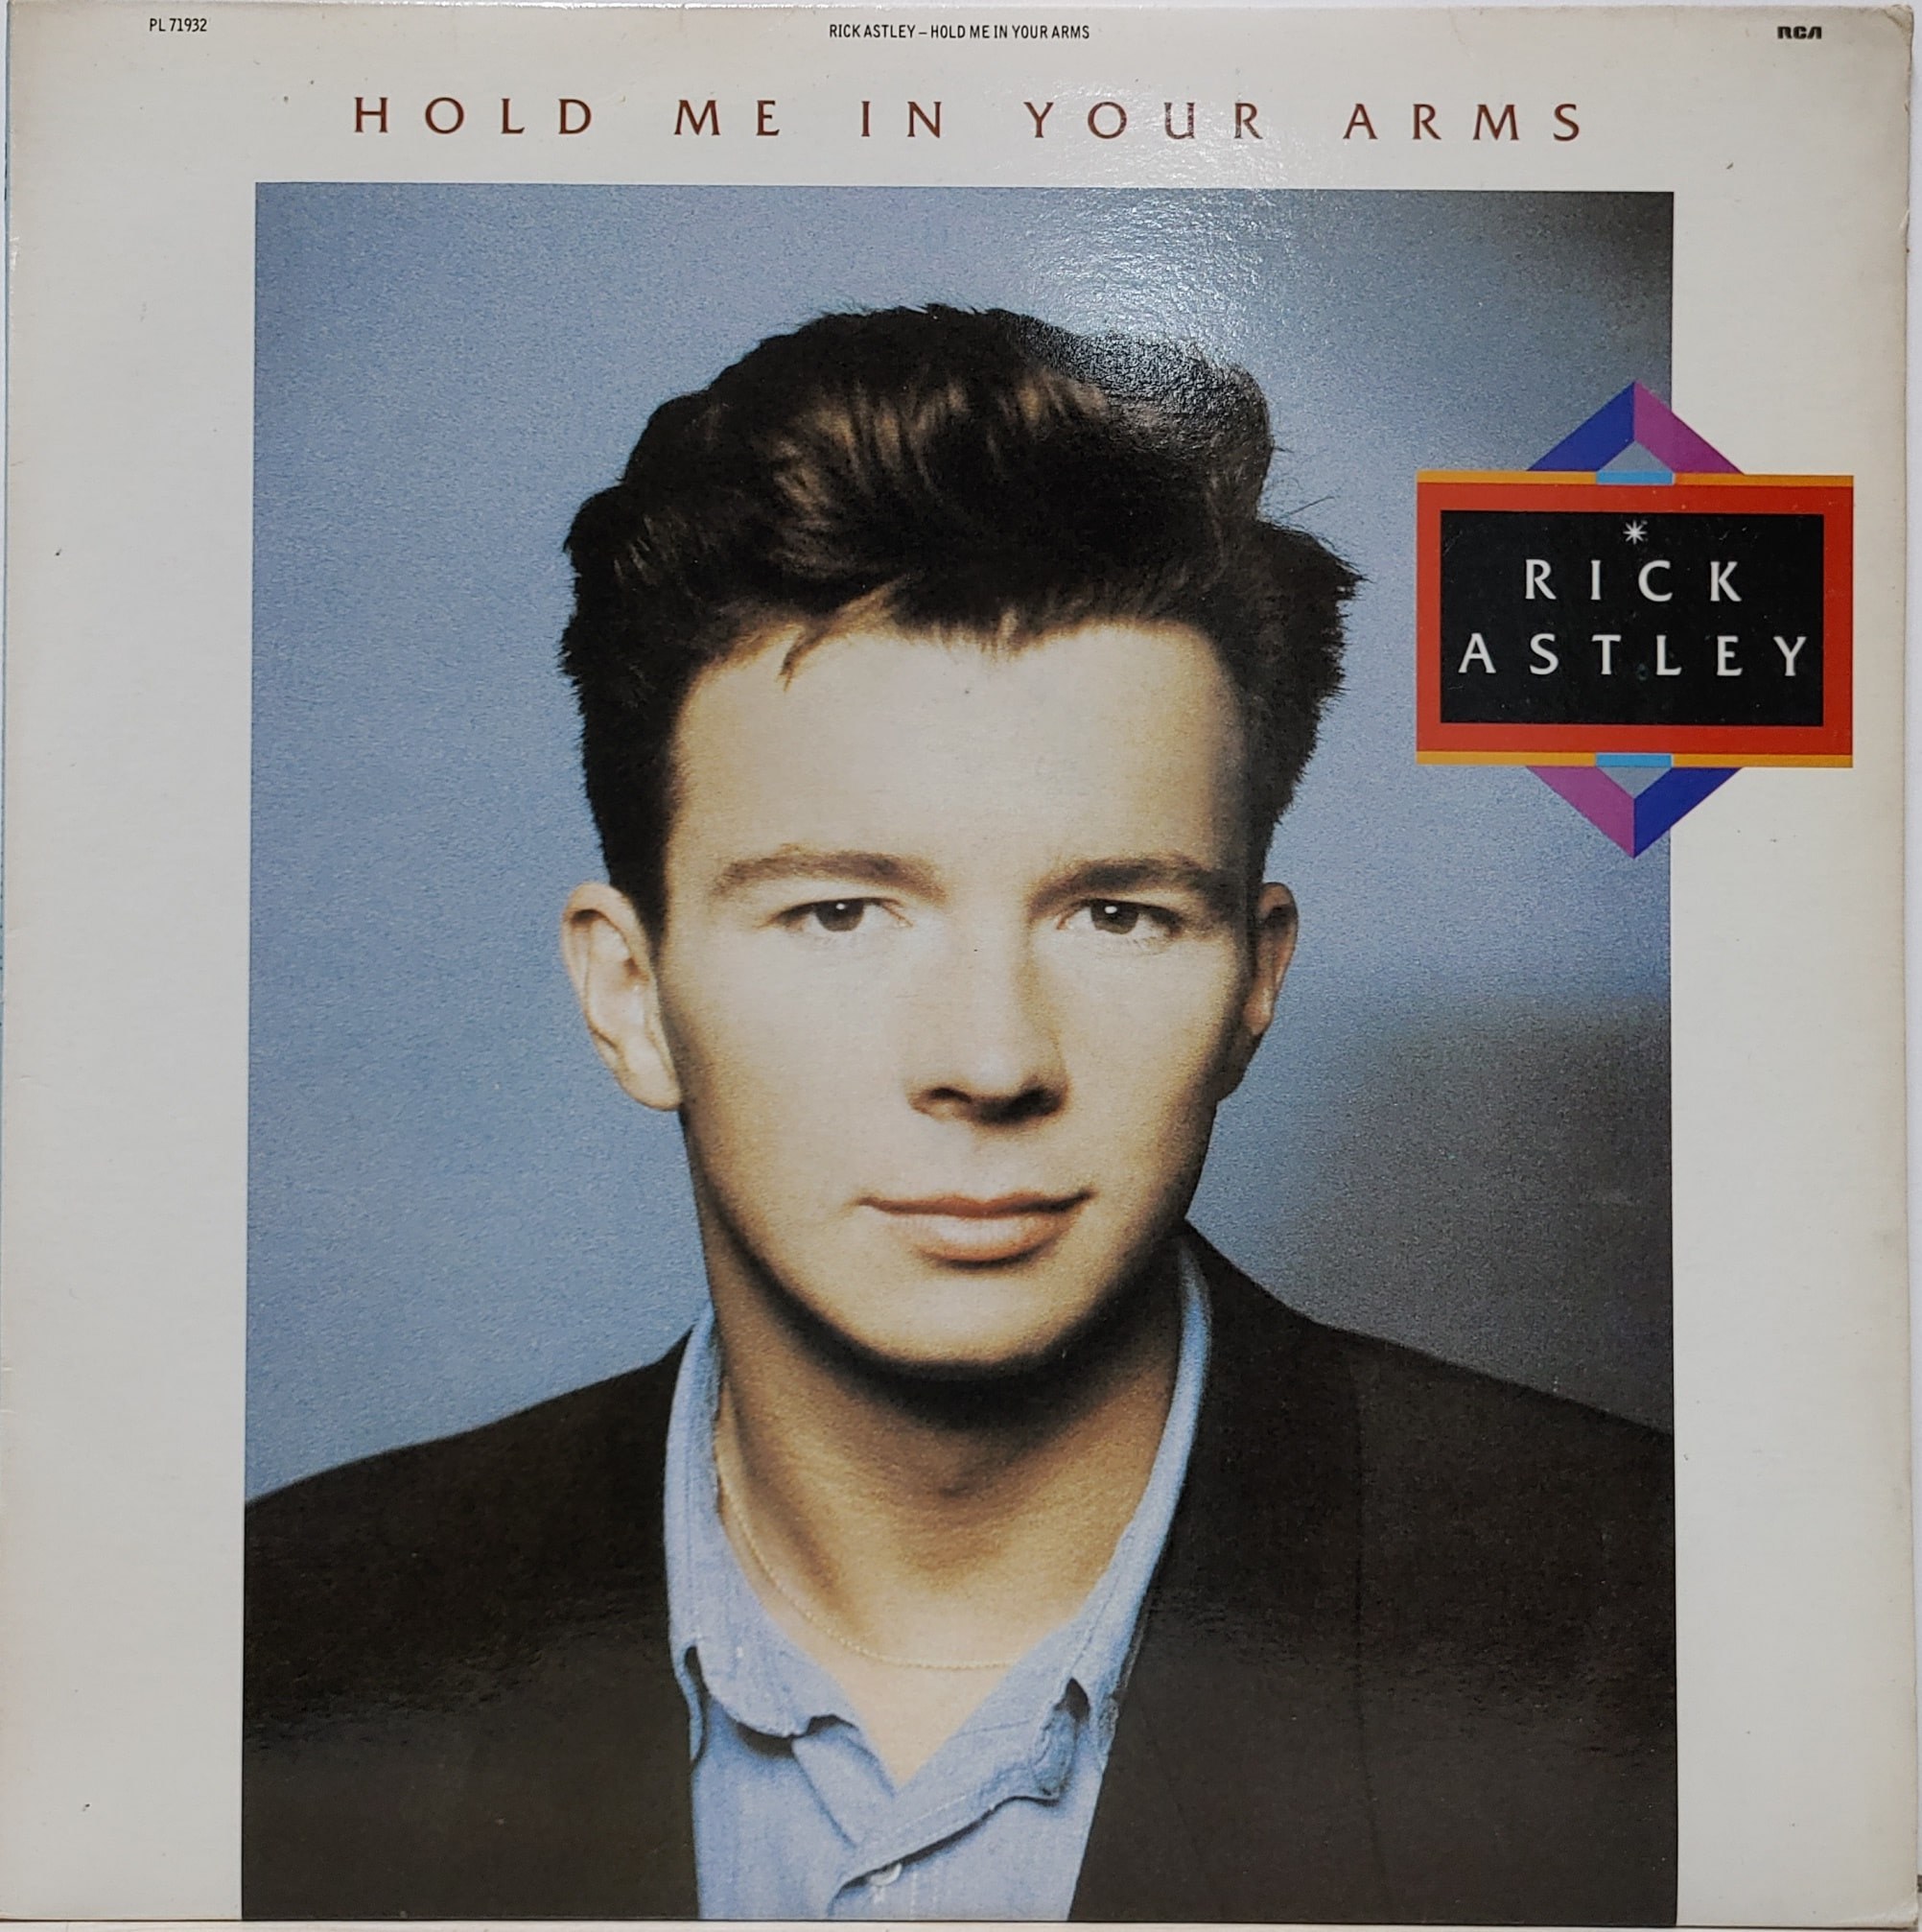 RICK ASTLEY / HOLD ME IN YOUR ARMS